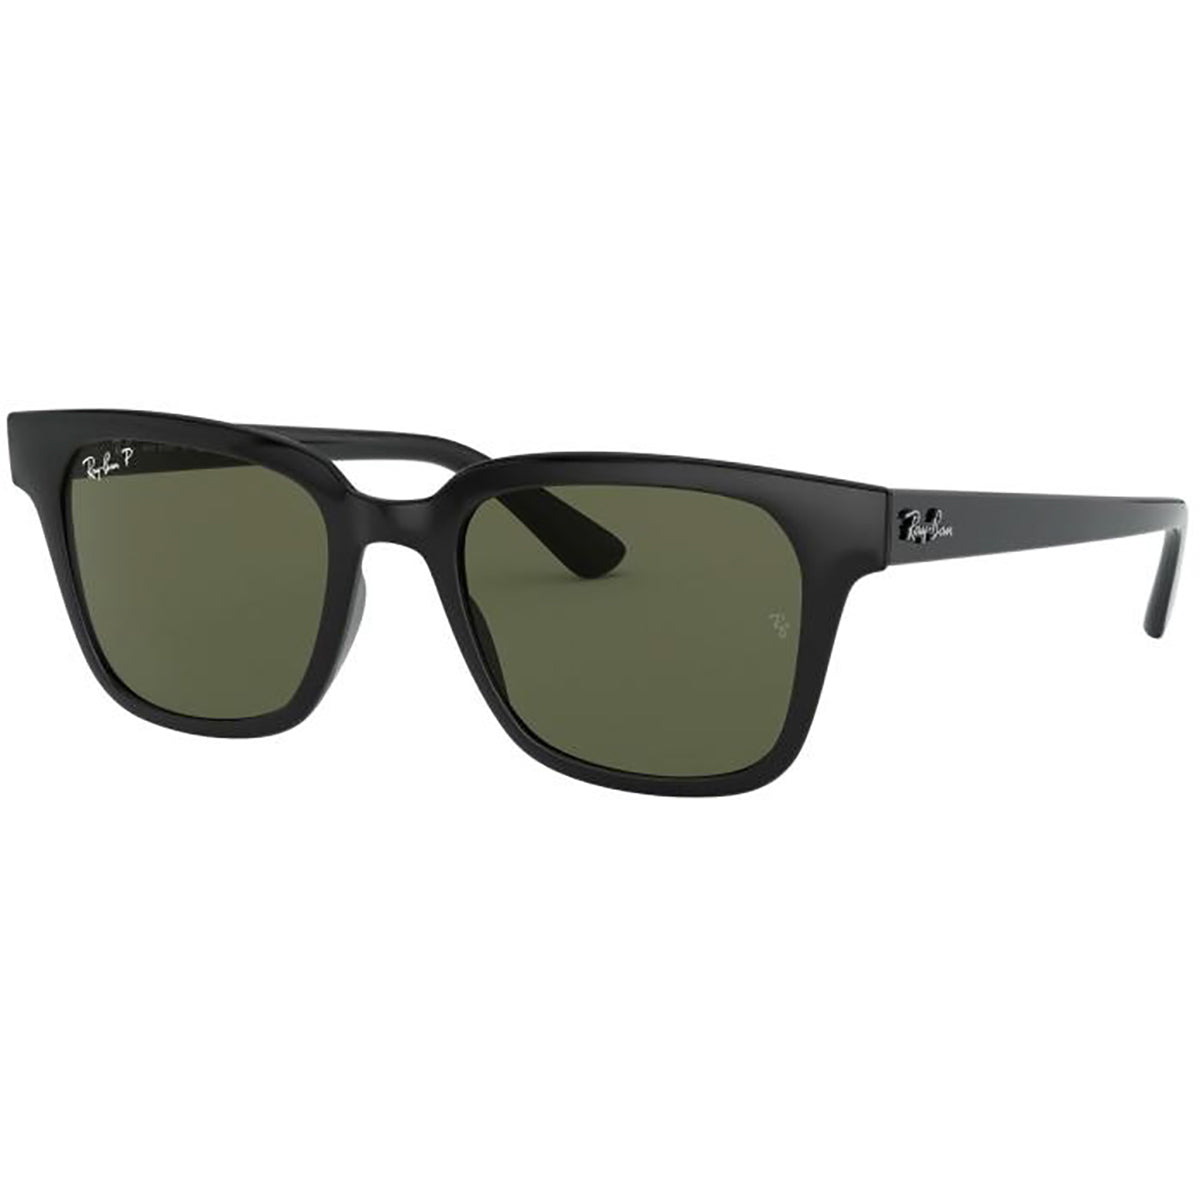 Ray-Ban RB4323 Adult Lifestyle Polarized Sunglasses-0RB4323